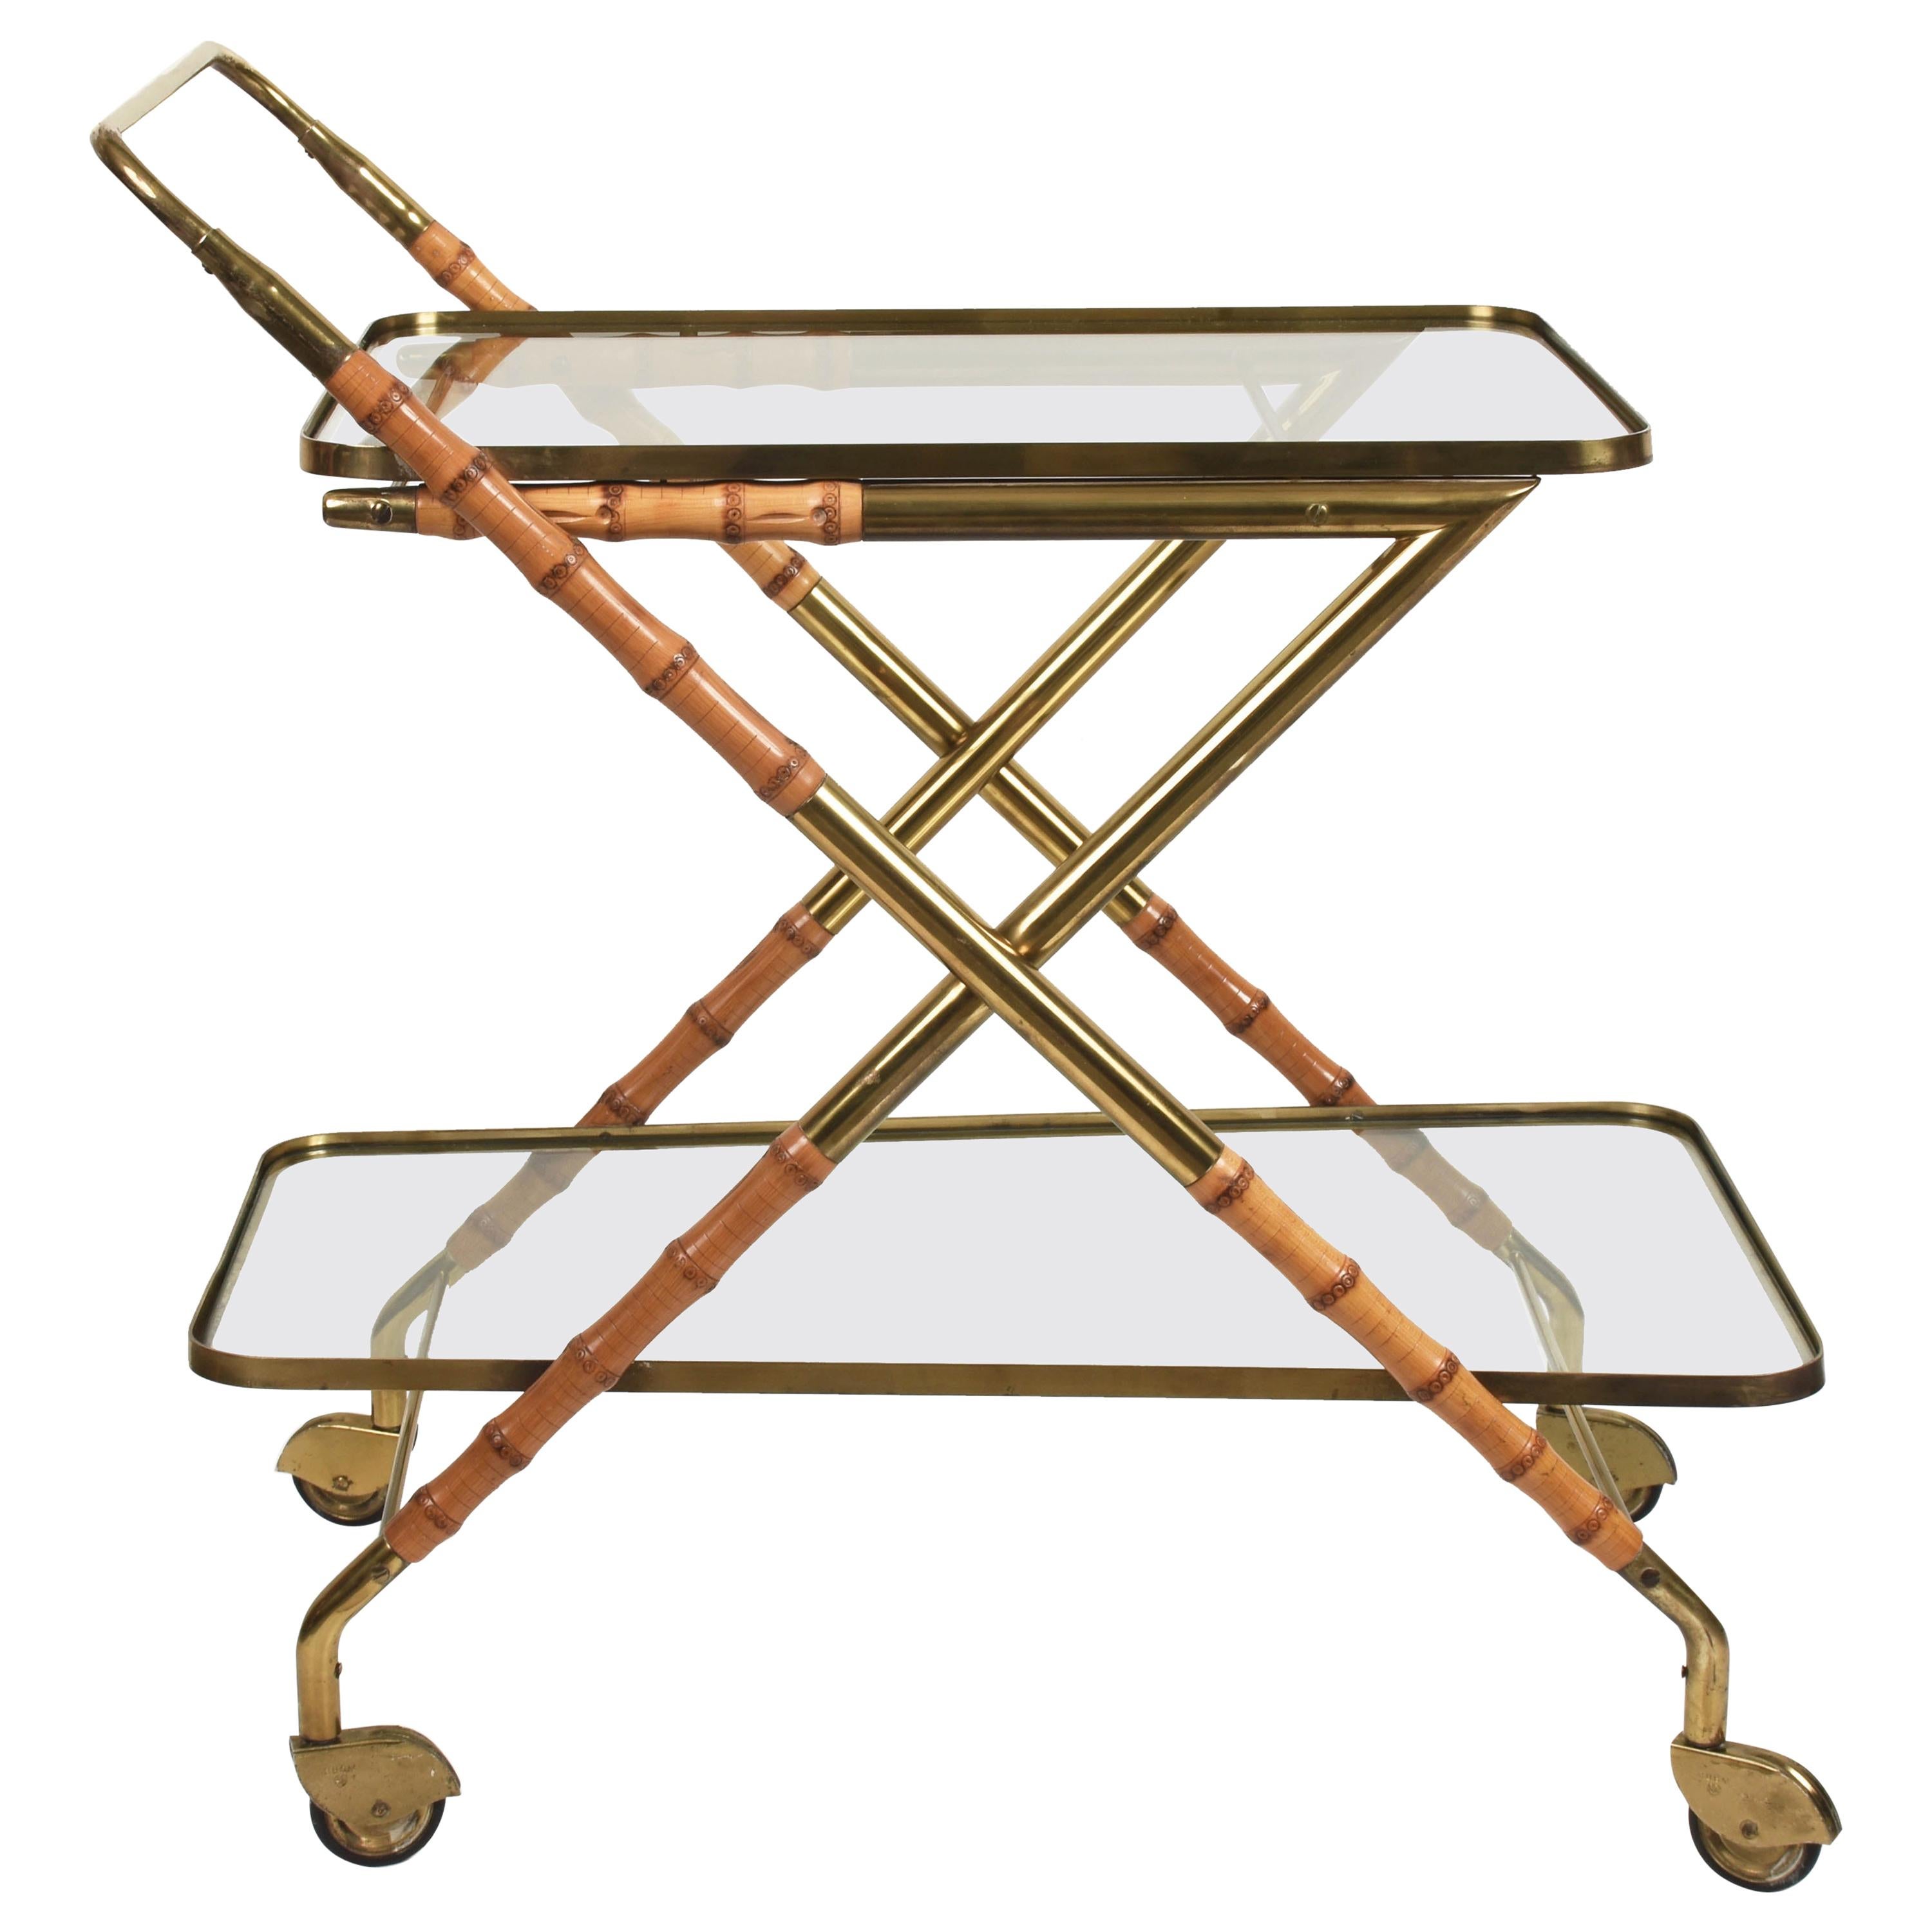 Lacca Midcentury Bamboo and Brass Italian Bar Cart with Glass Shelves, 1950s